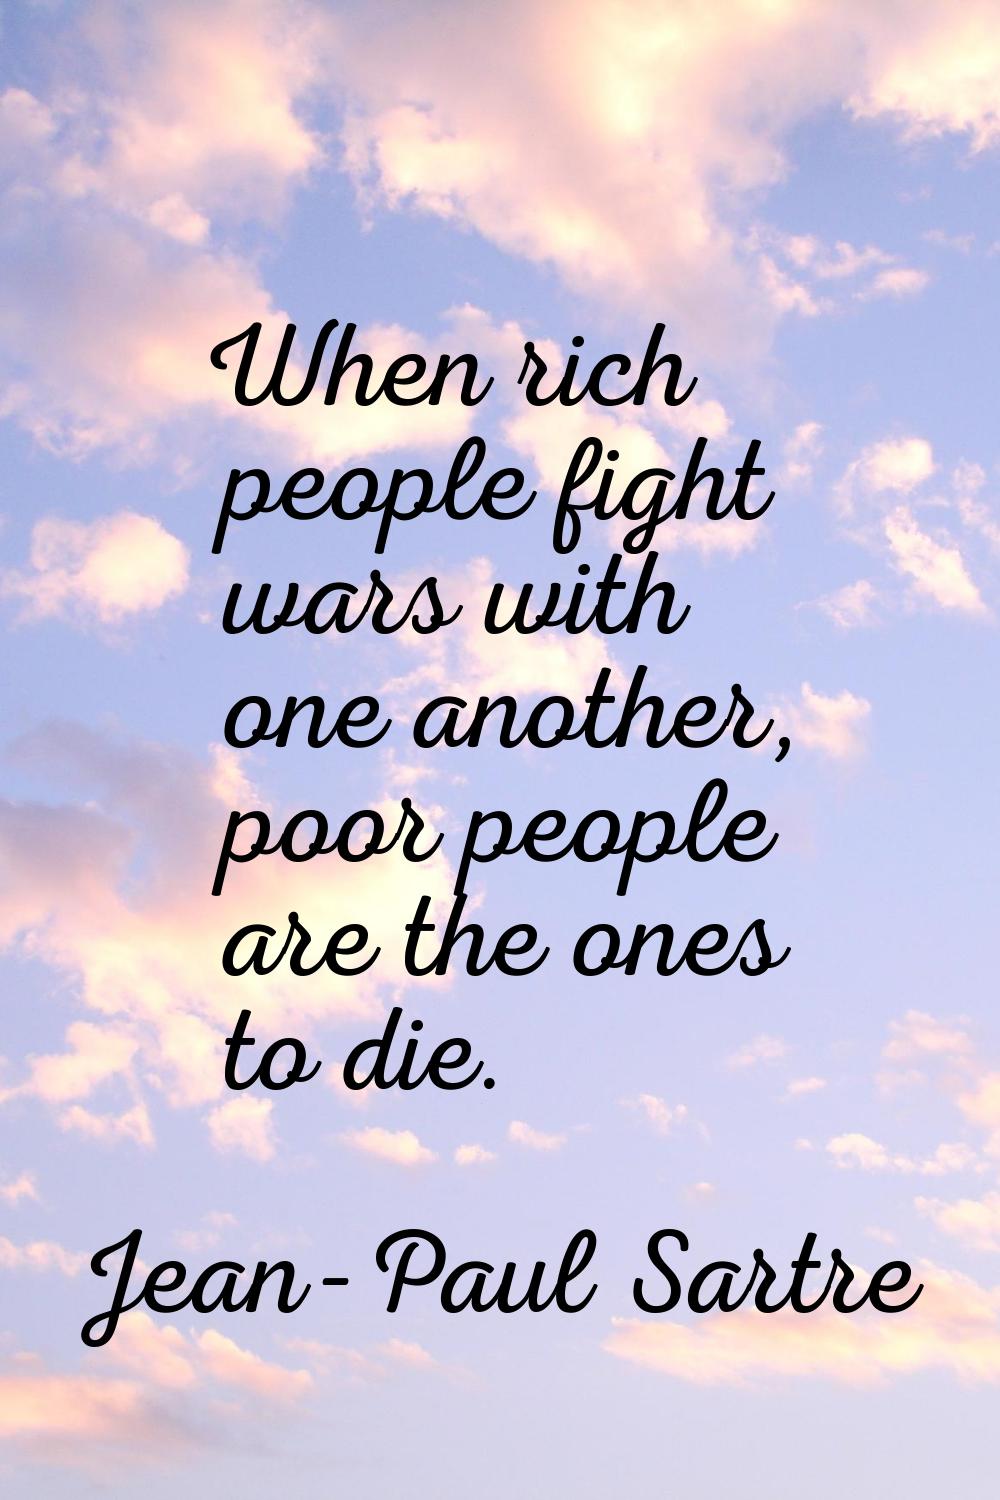 When rich people fight wars with one another, poor people are the ones to die.